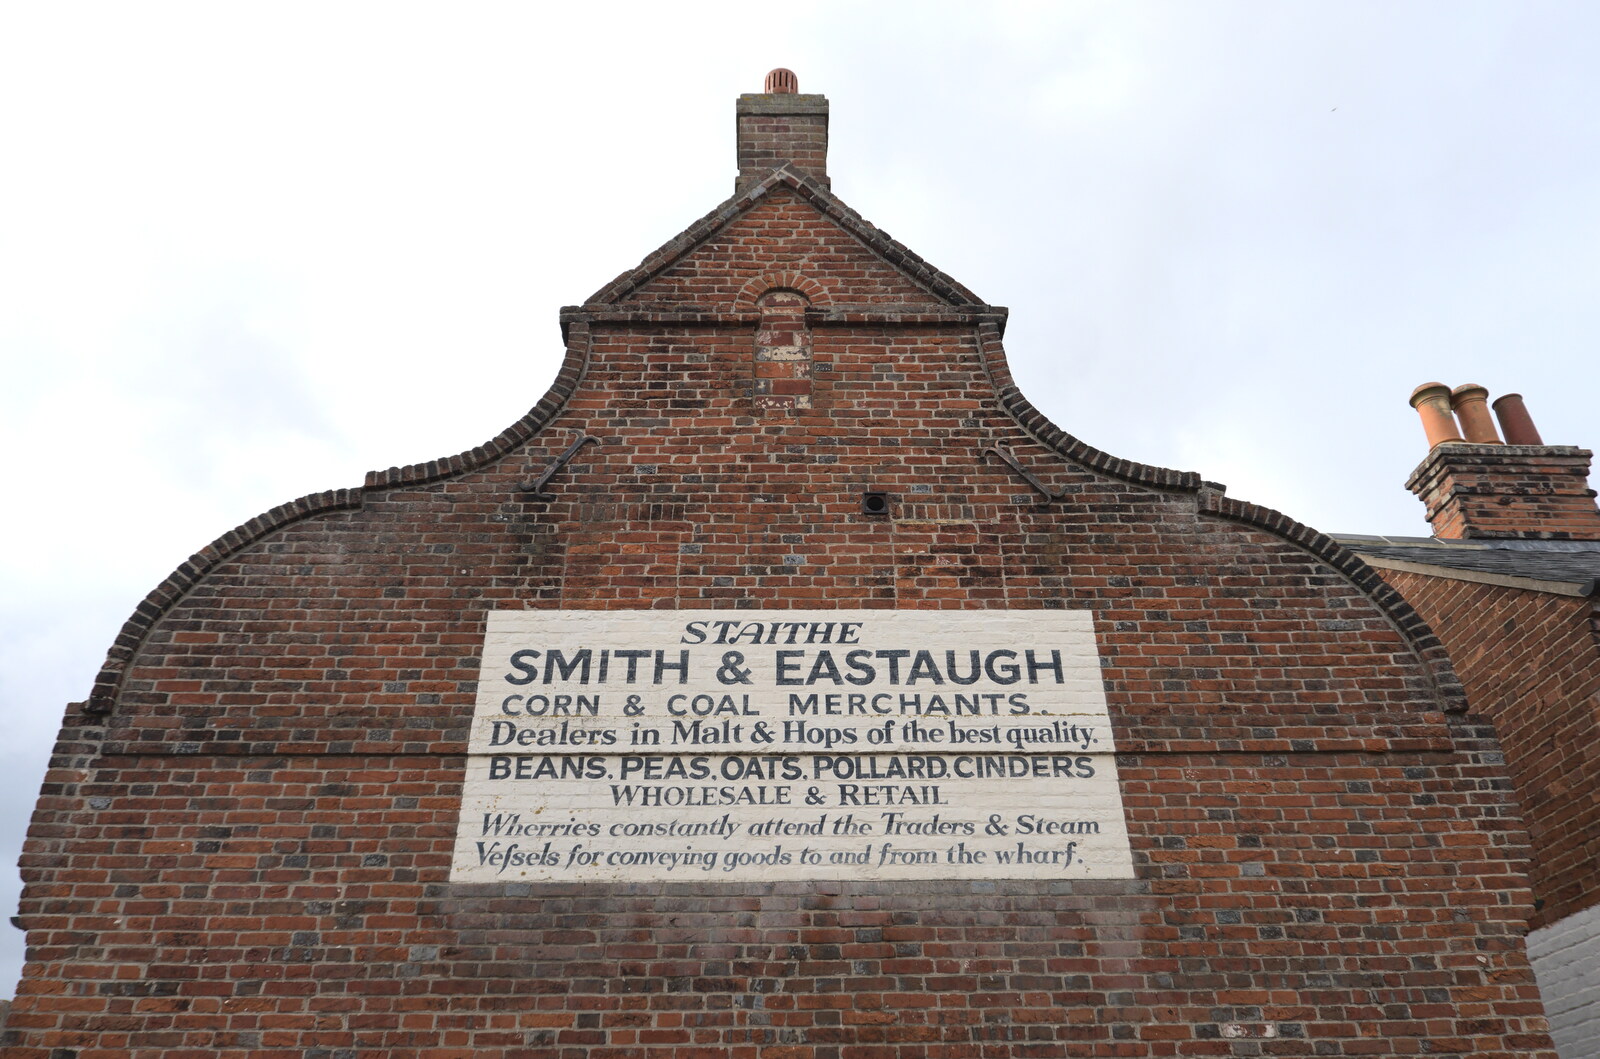 An Afternoon in Beccles, Suffolk - 26th October 2022: A nice repro sign for Smith and Eastaugh